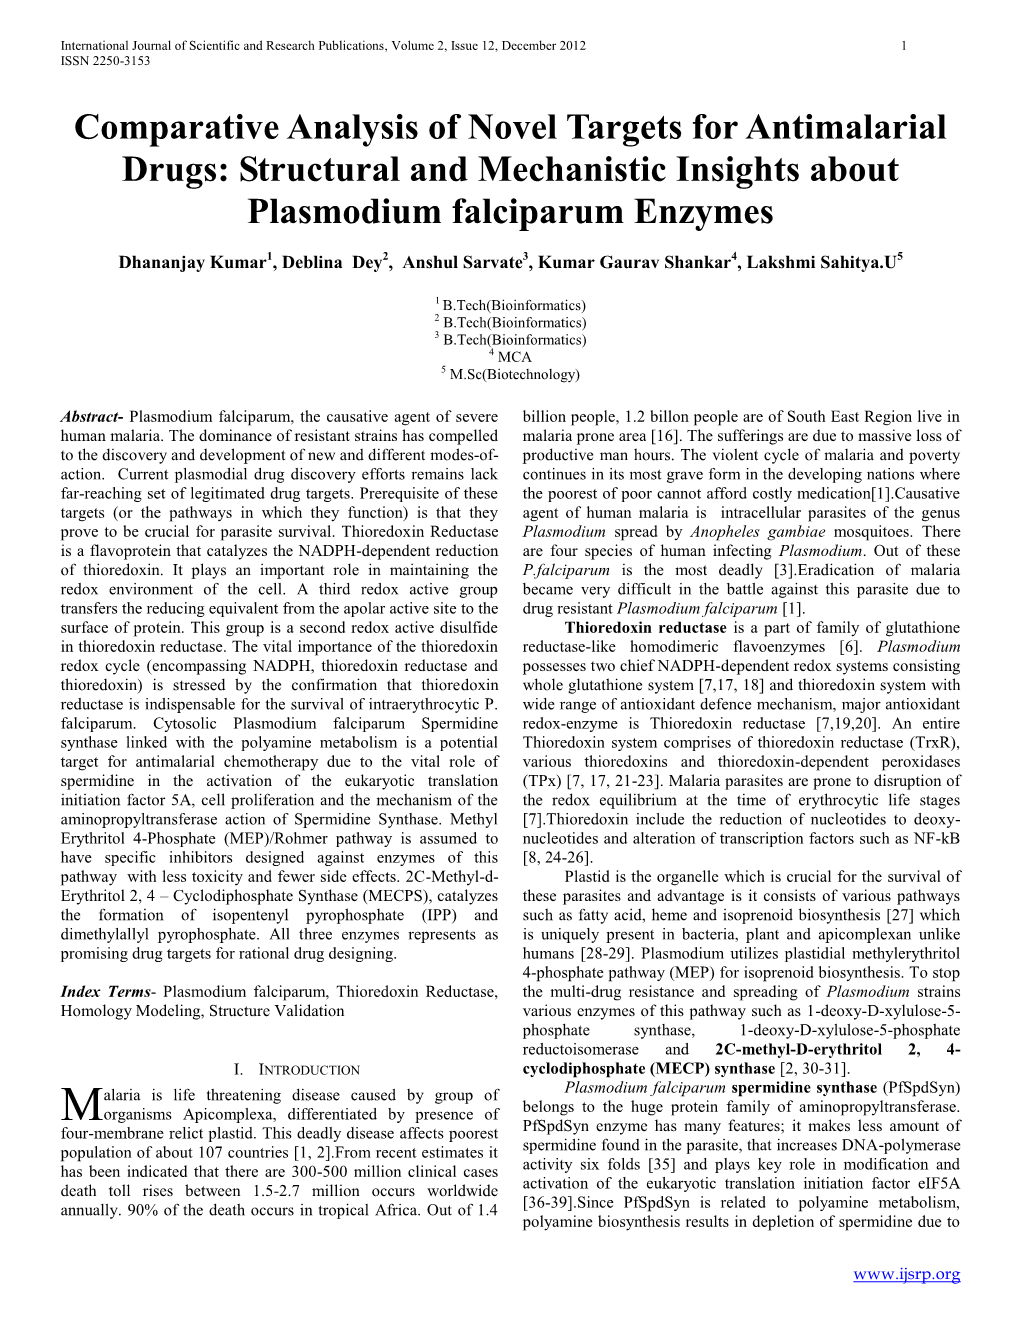 Structural and Mechanistic Insights About Plasmodium Falciparum Enzymes